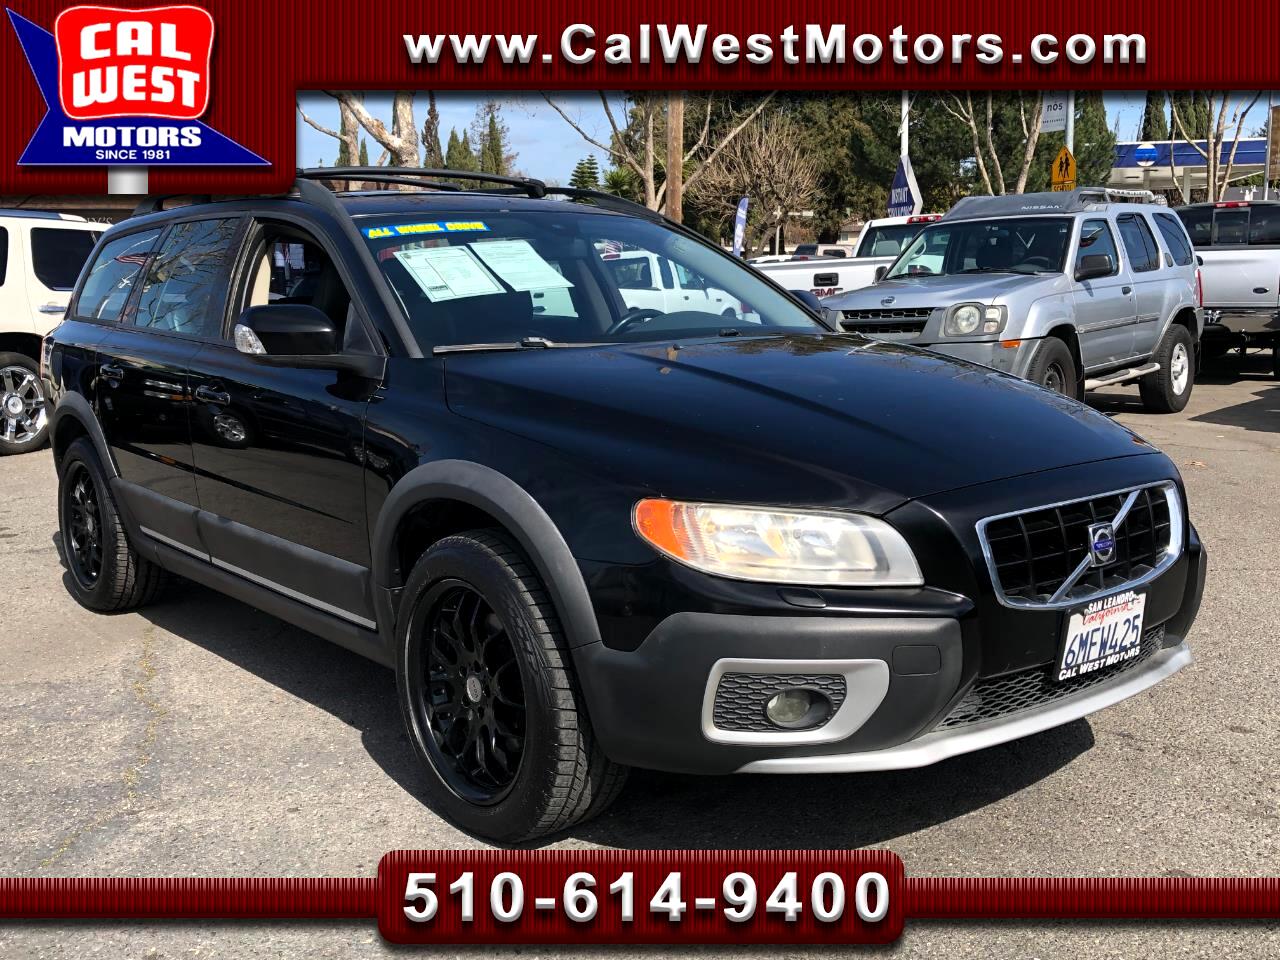 Used 08 Volvo Xc70 Cross Country Awd Wagon Moonroof Exprtmntnce For Sale In San Leandro Oakland Alam Ca Cal West Motors